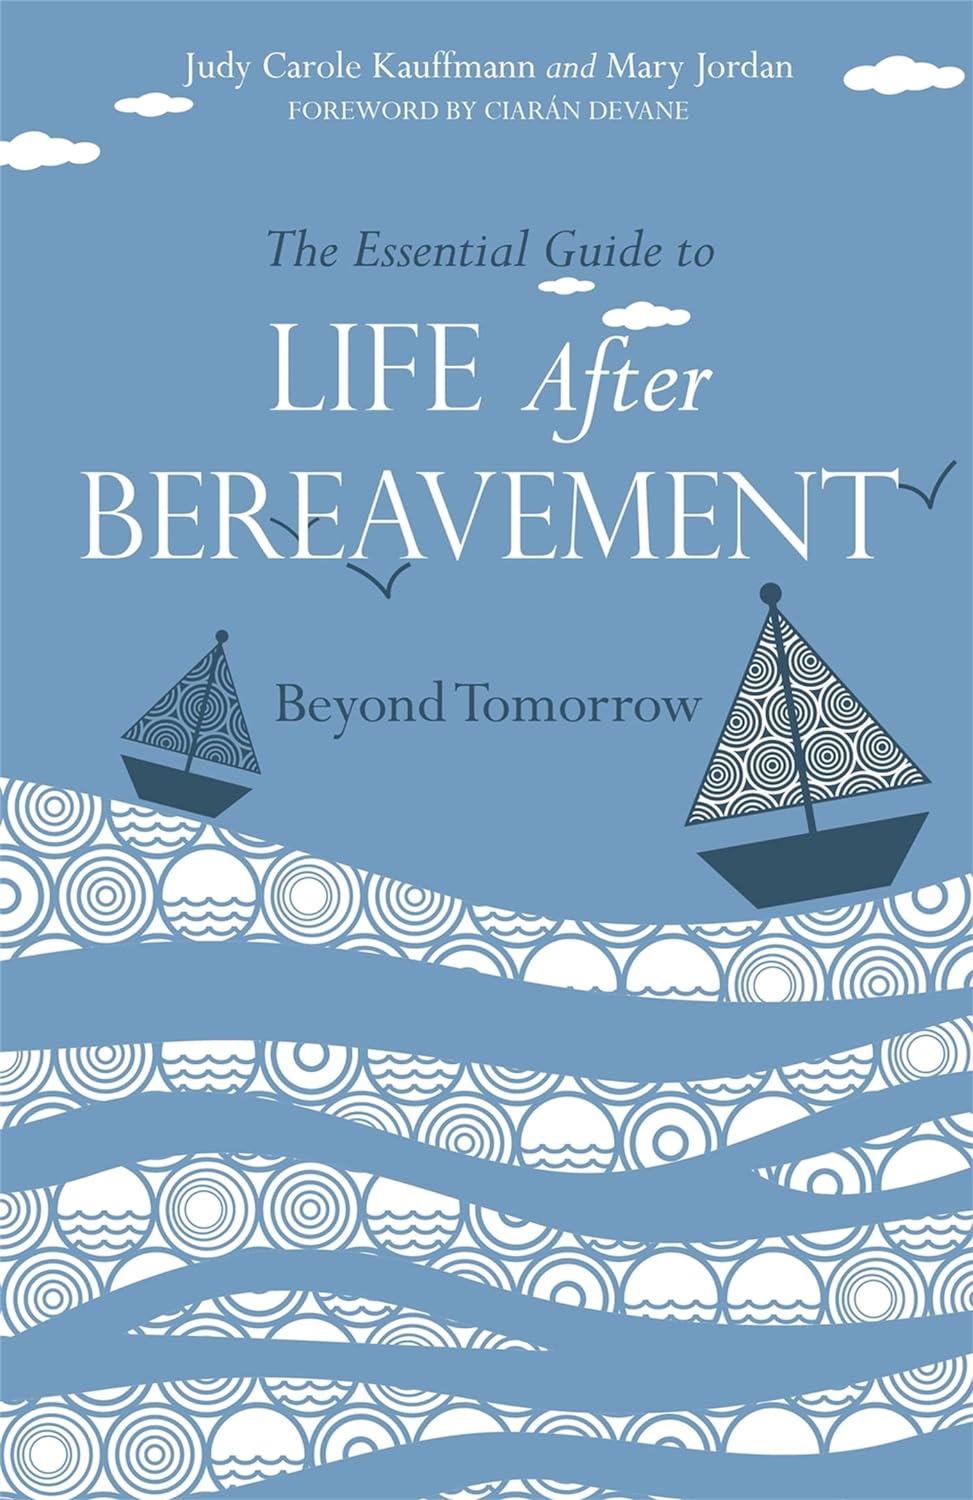 Book cover for The Essential Guide to Life After Bereavement by Judy Carole Kauffmann and Mary Jordan